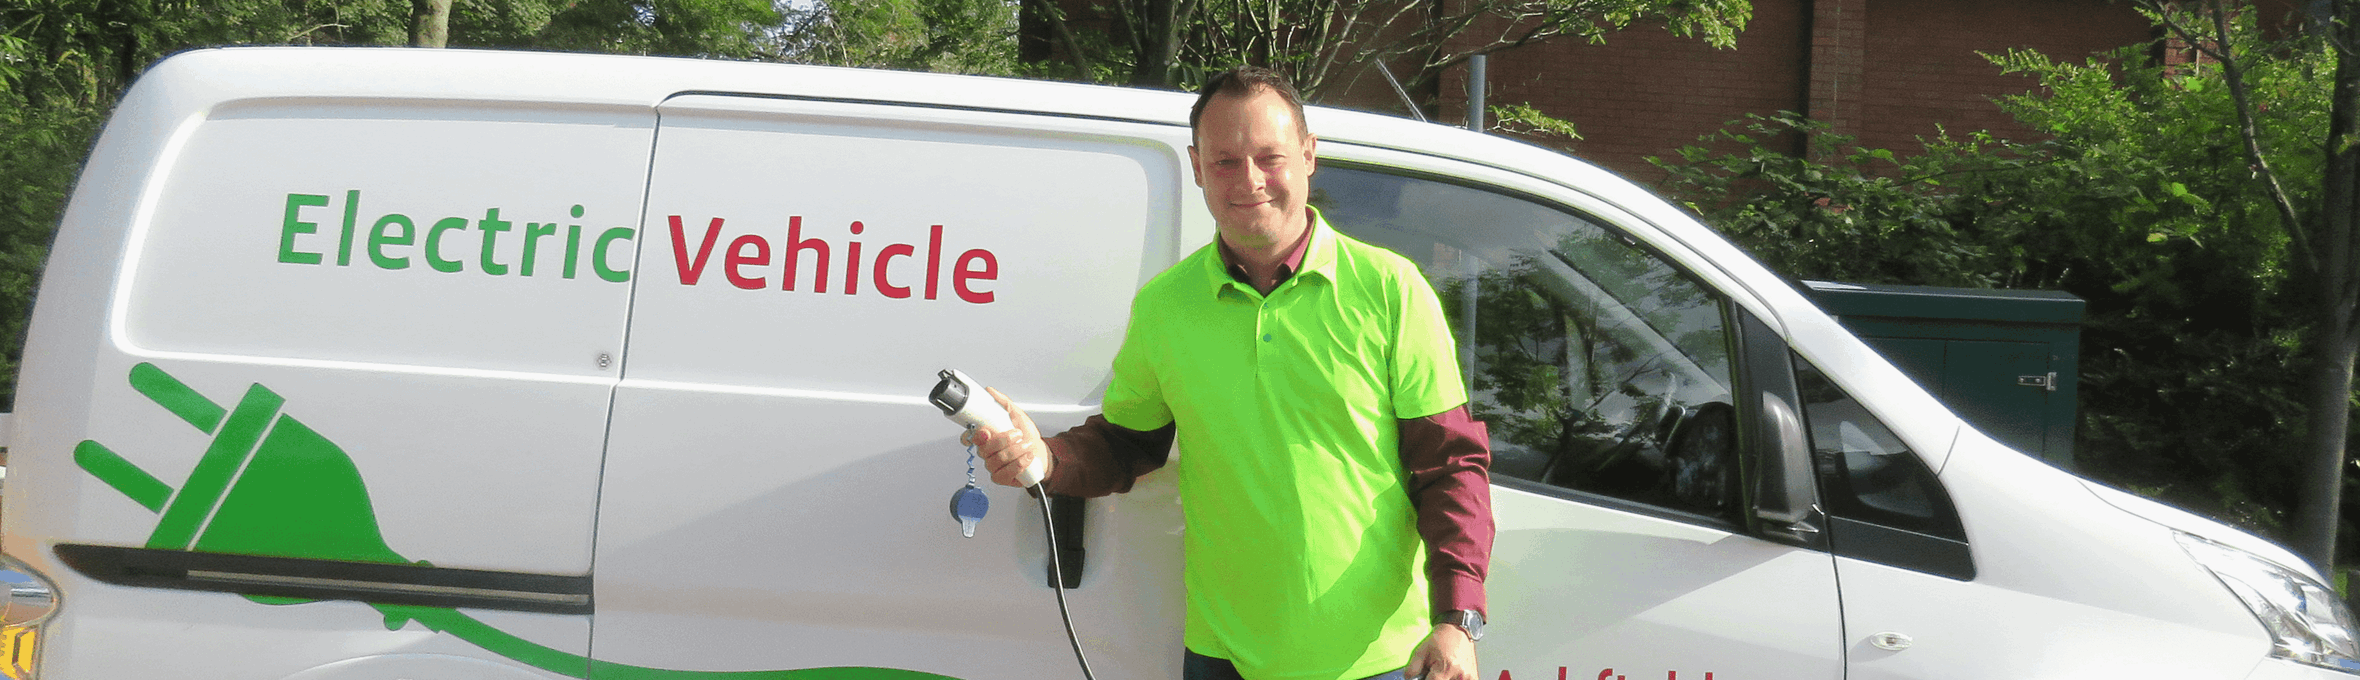 Cllr Jason Zadrozny sttod in front of electrically charged white van 